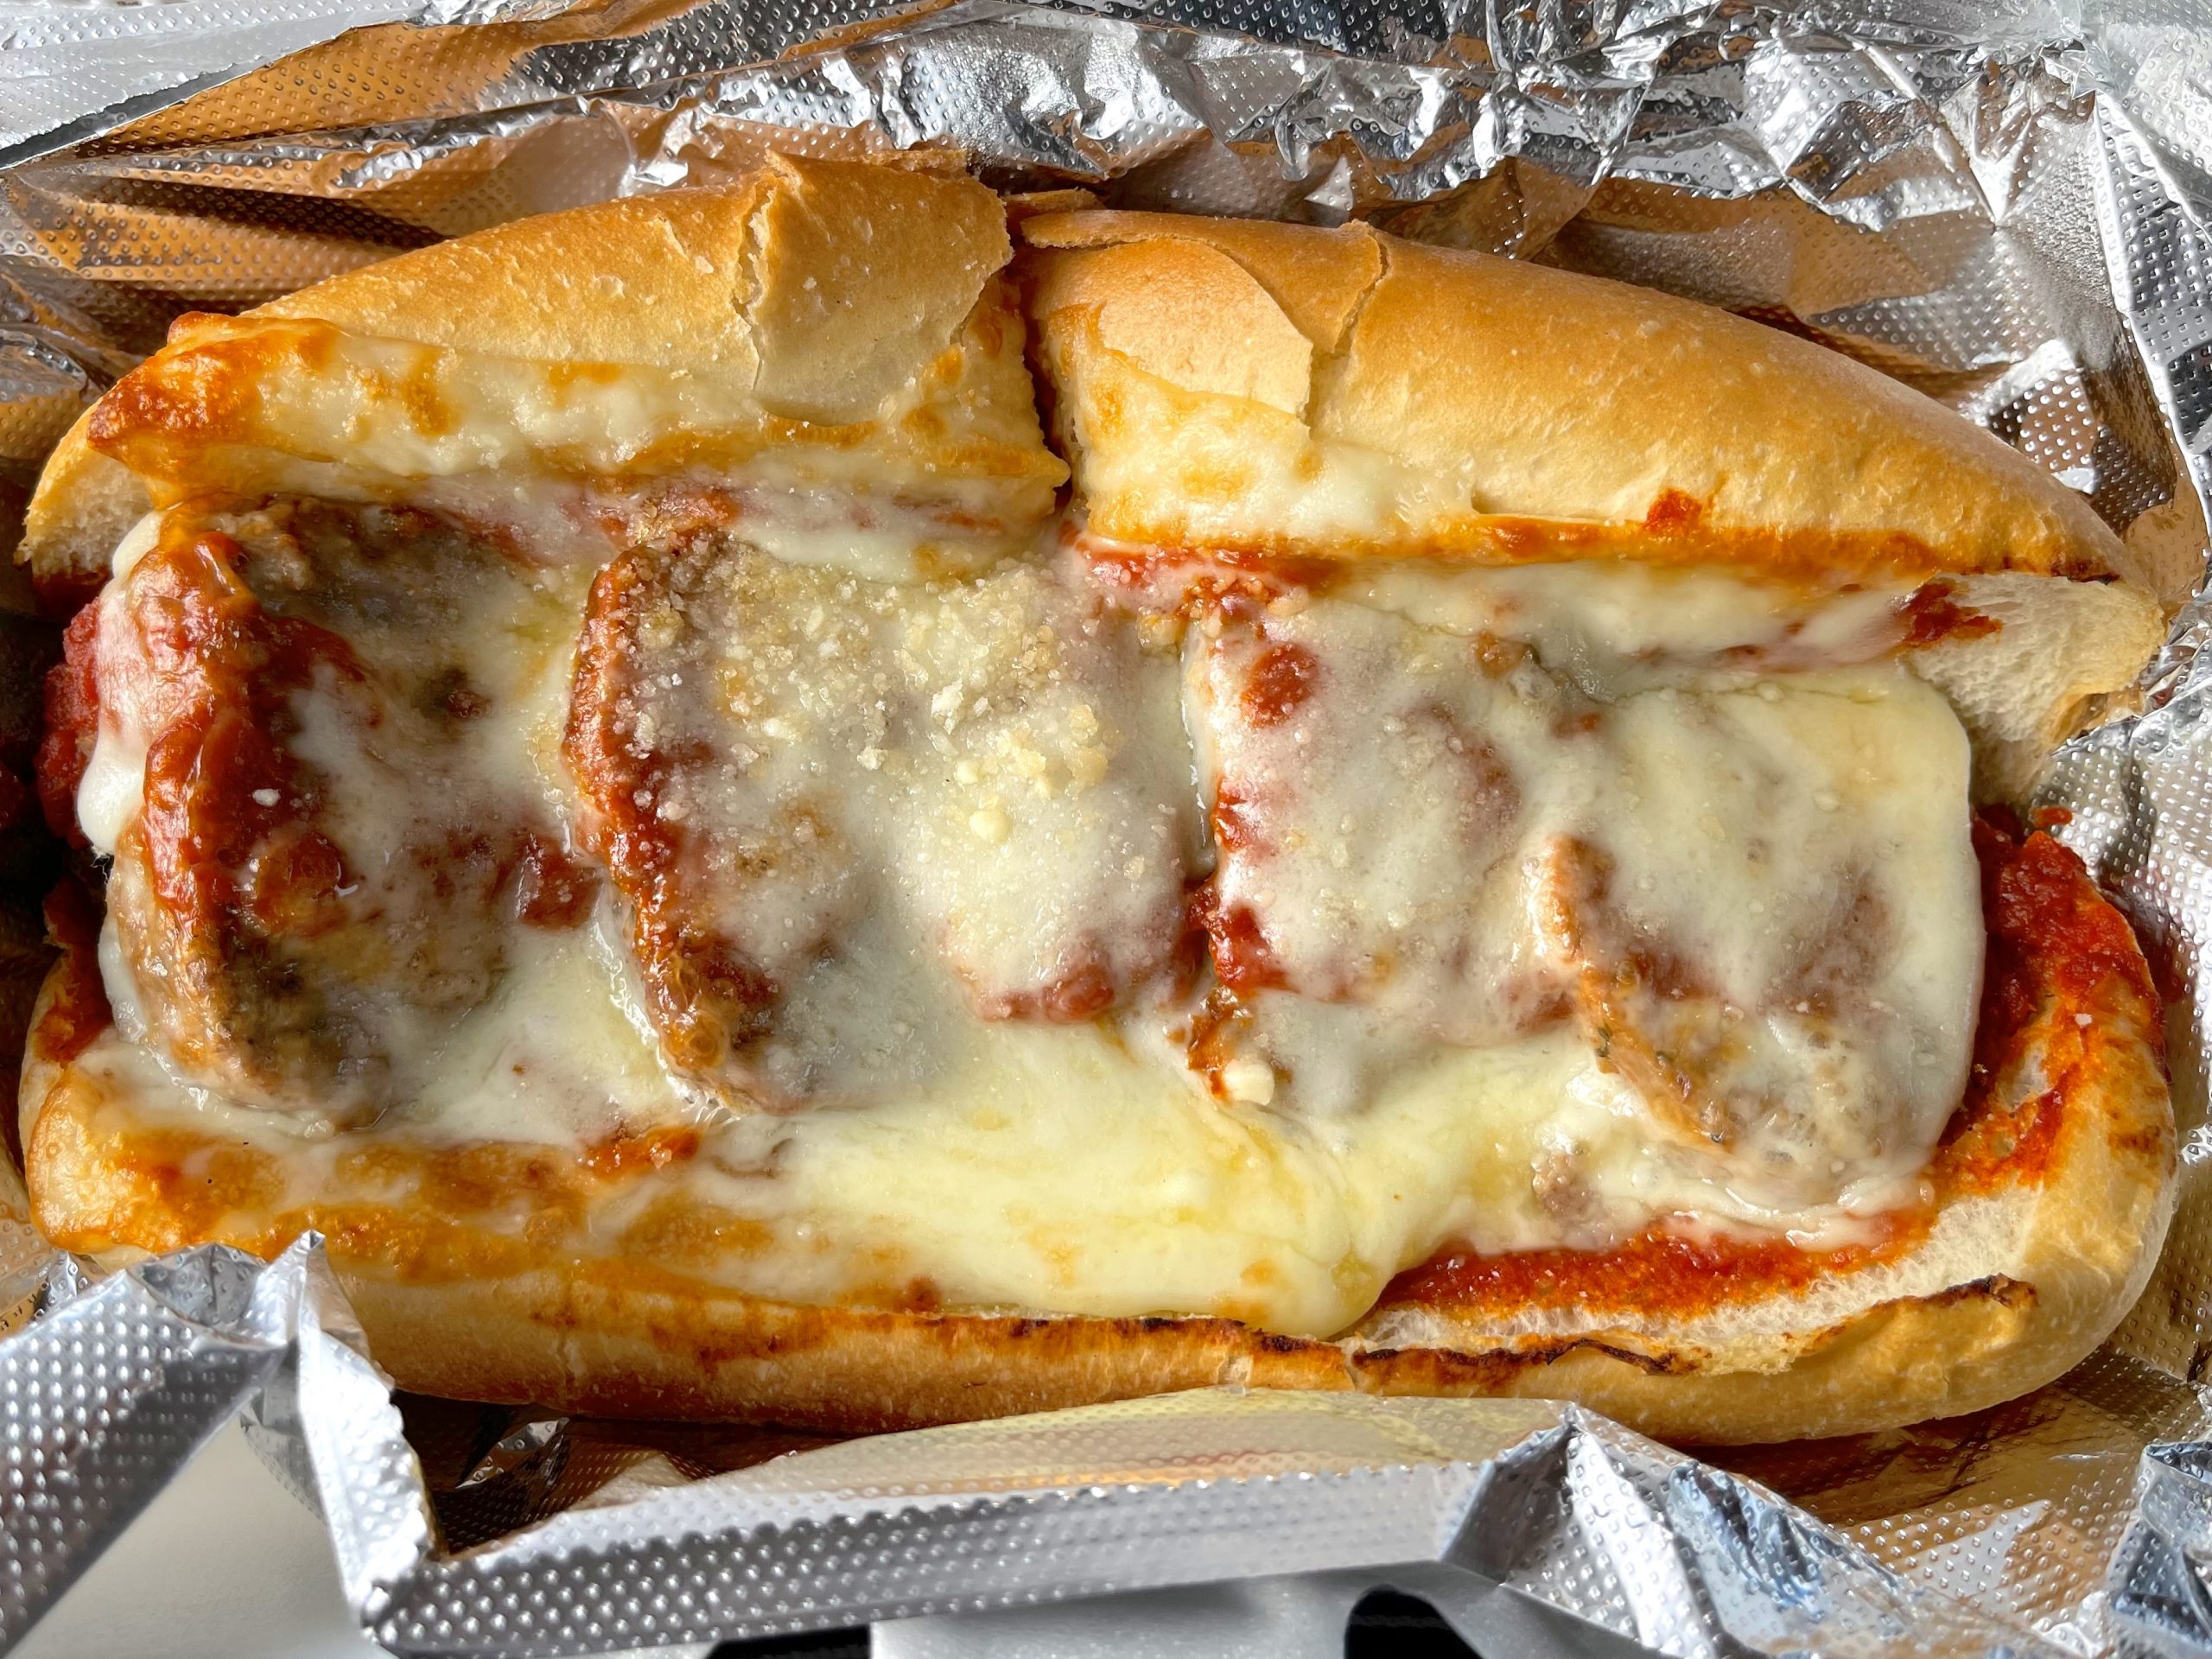 Meatball Subs from East Side Pizza in Miami, Florida